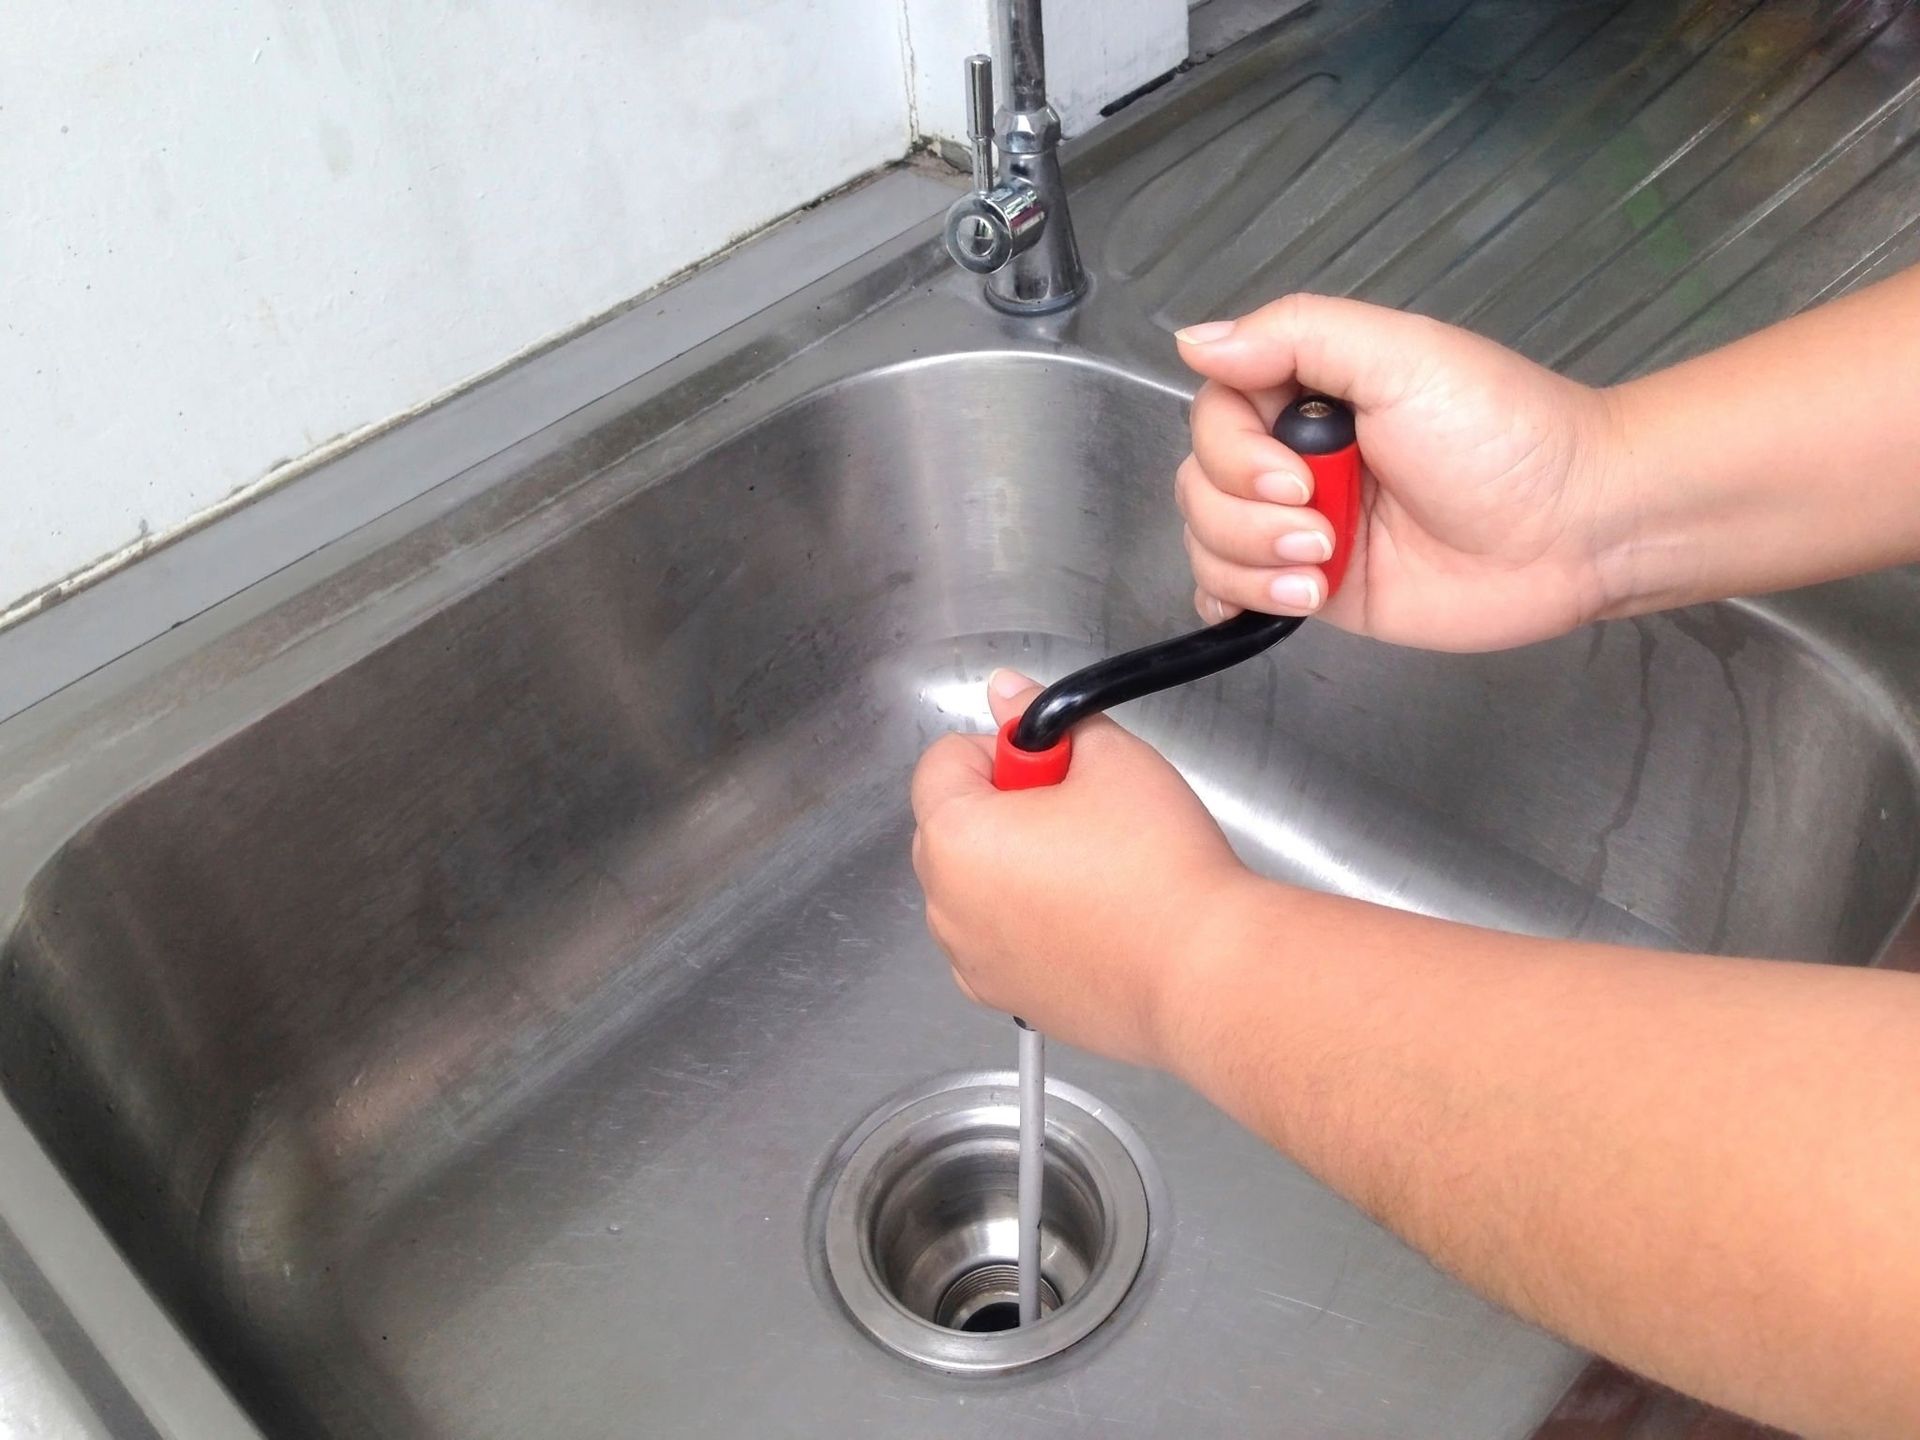 Tier One Plumbing solutions offers Drain Cleaning servicing TN